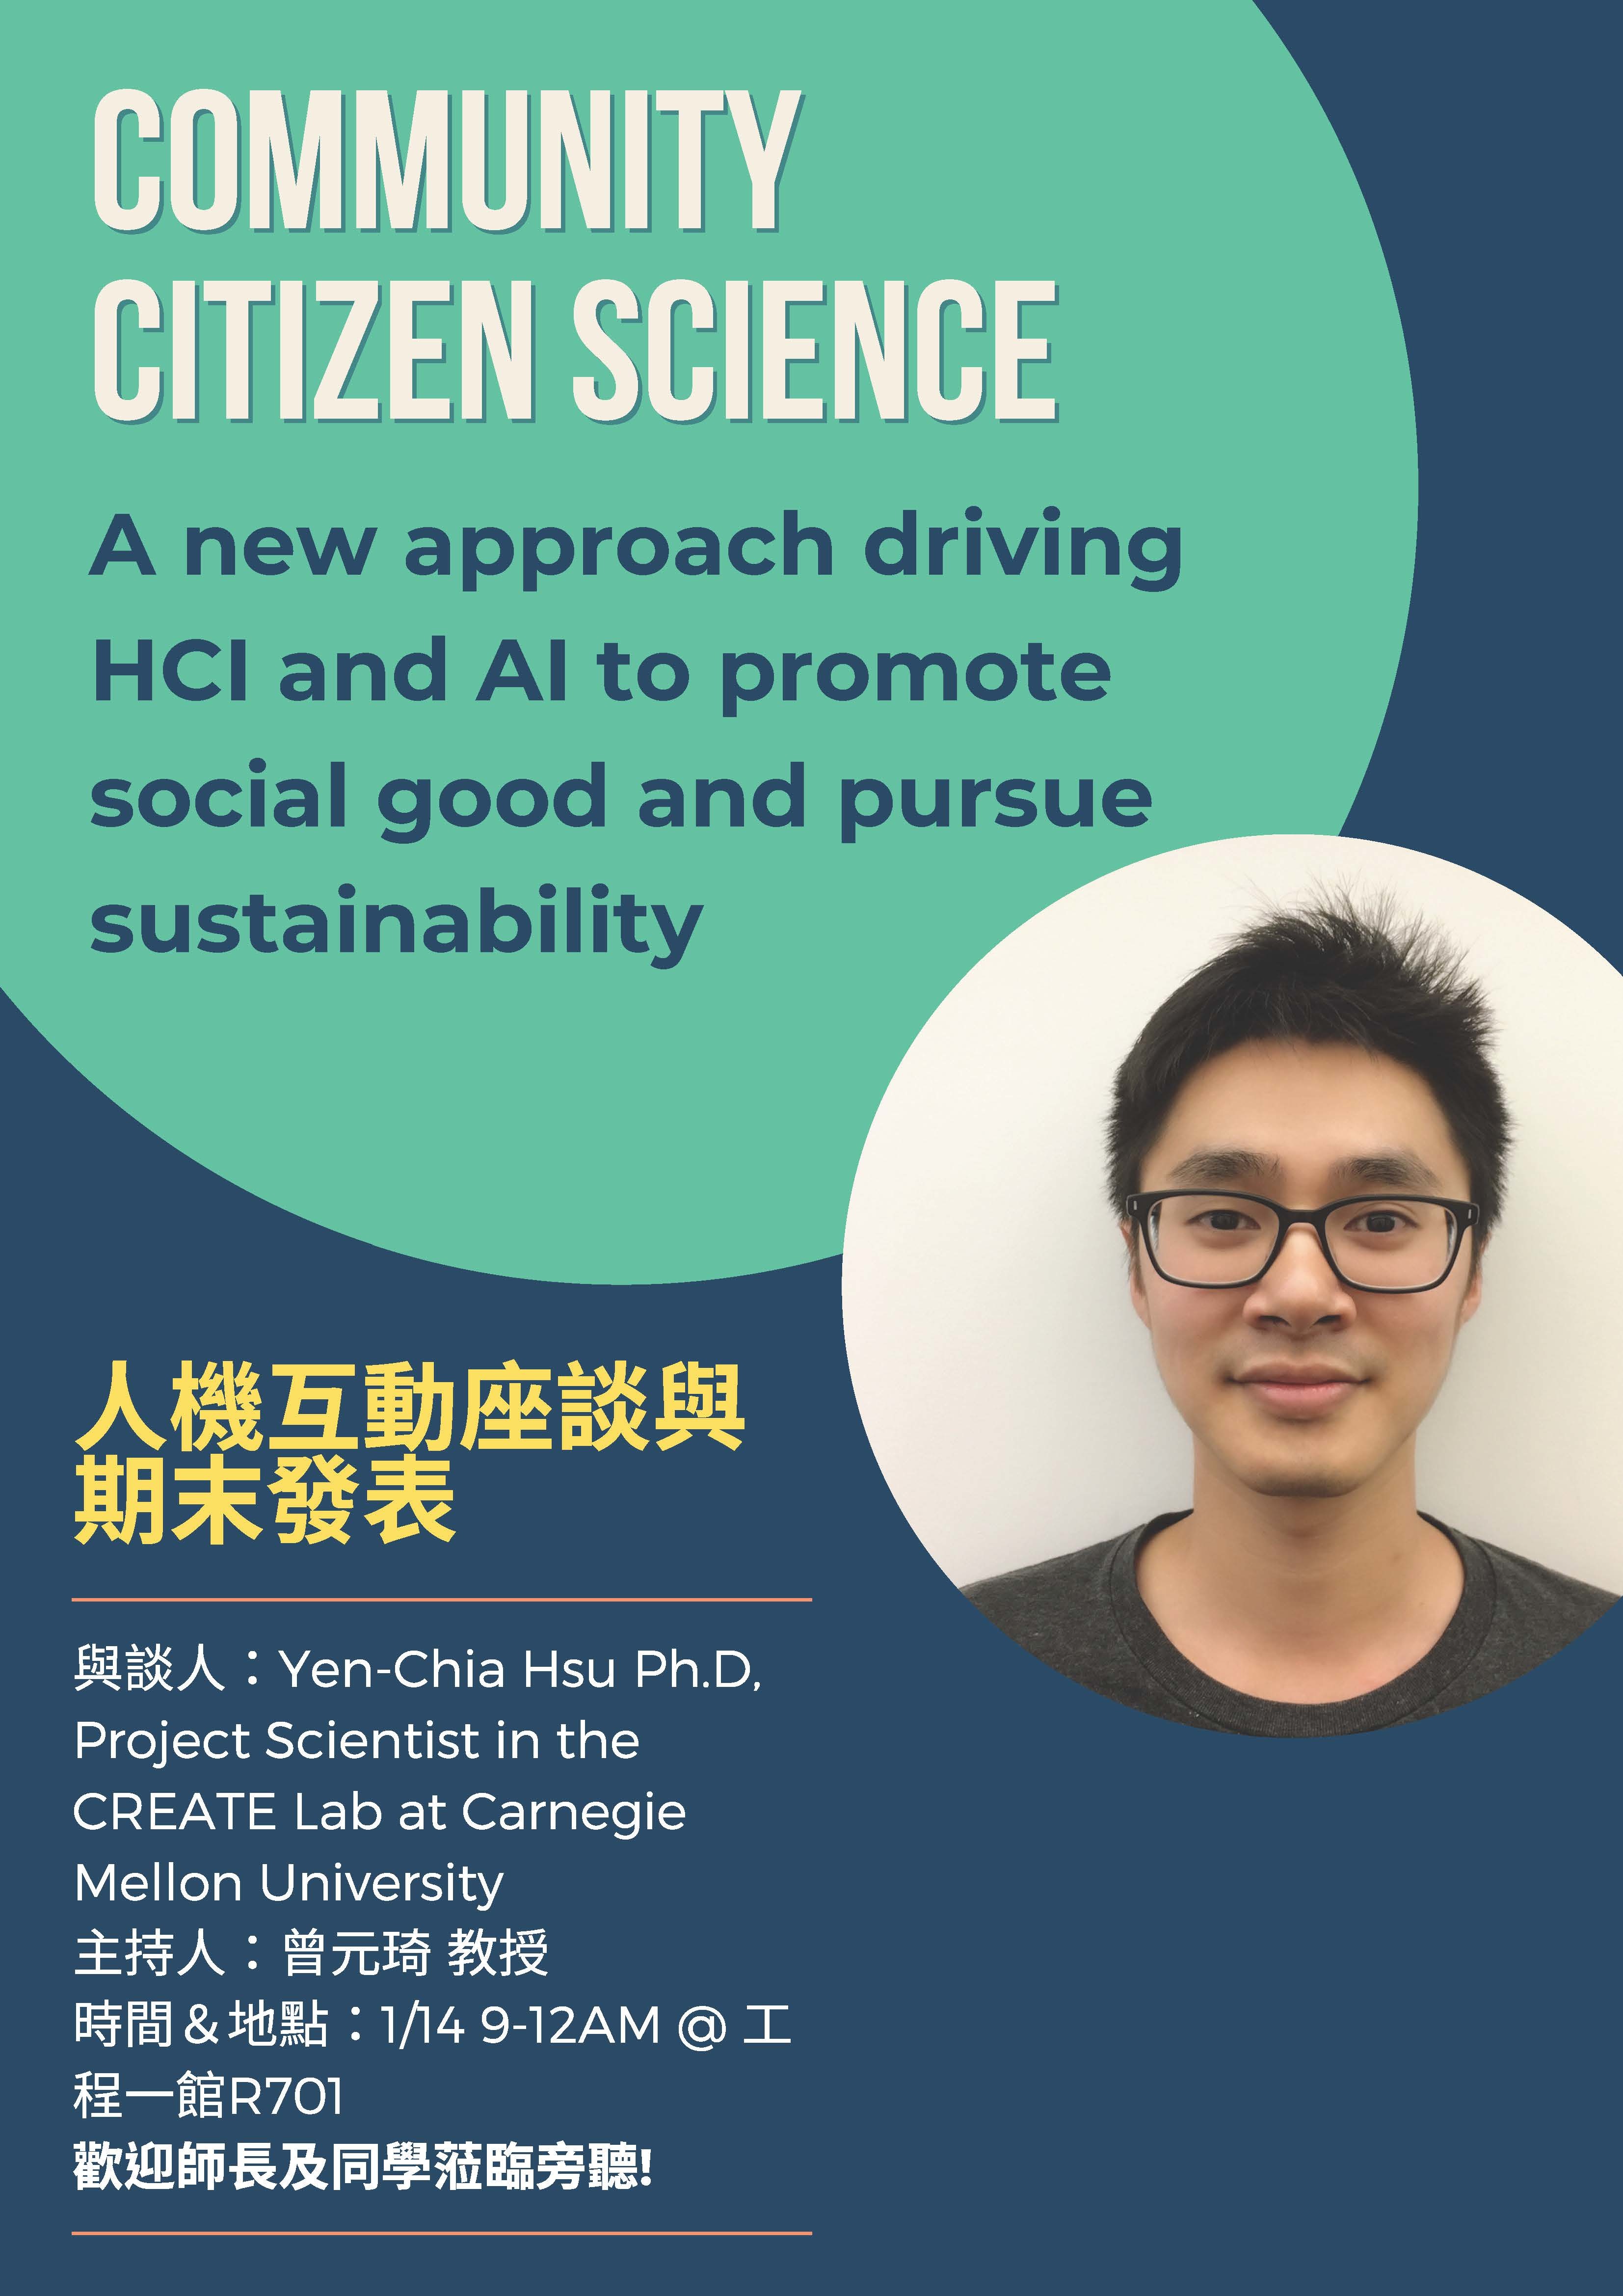 A new approach driving HCI and AI to promote social good and pursue sustainability Yen-Chia, Hsu